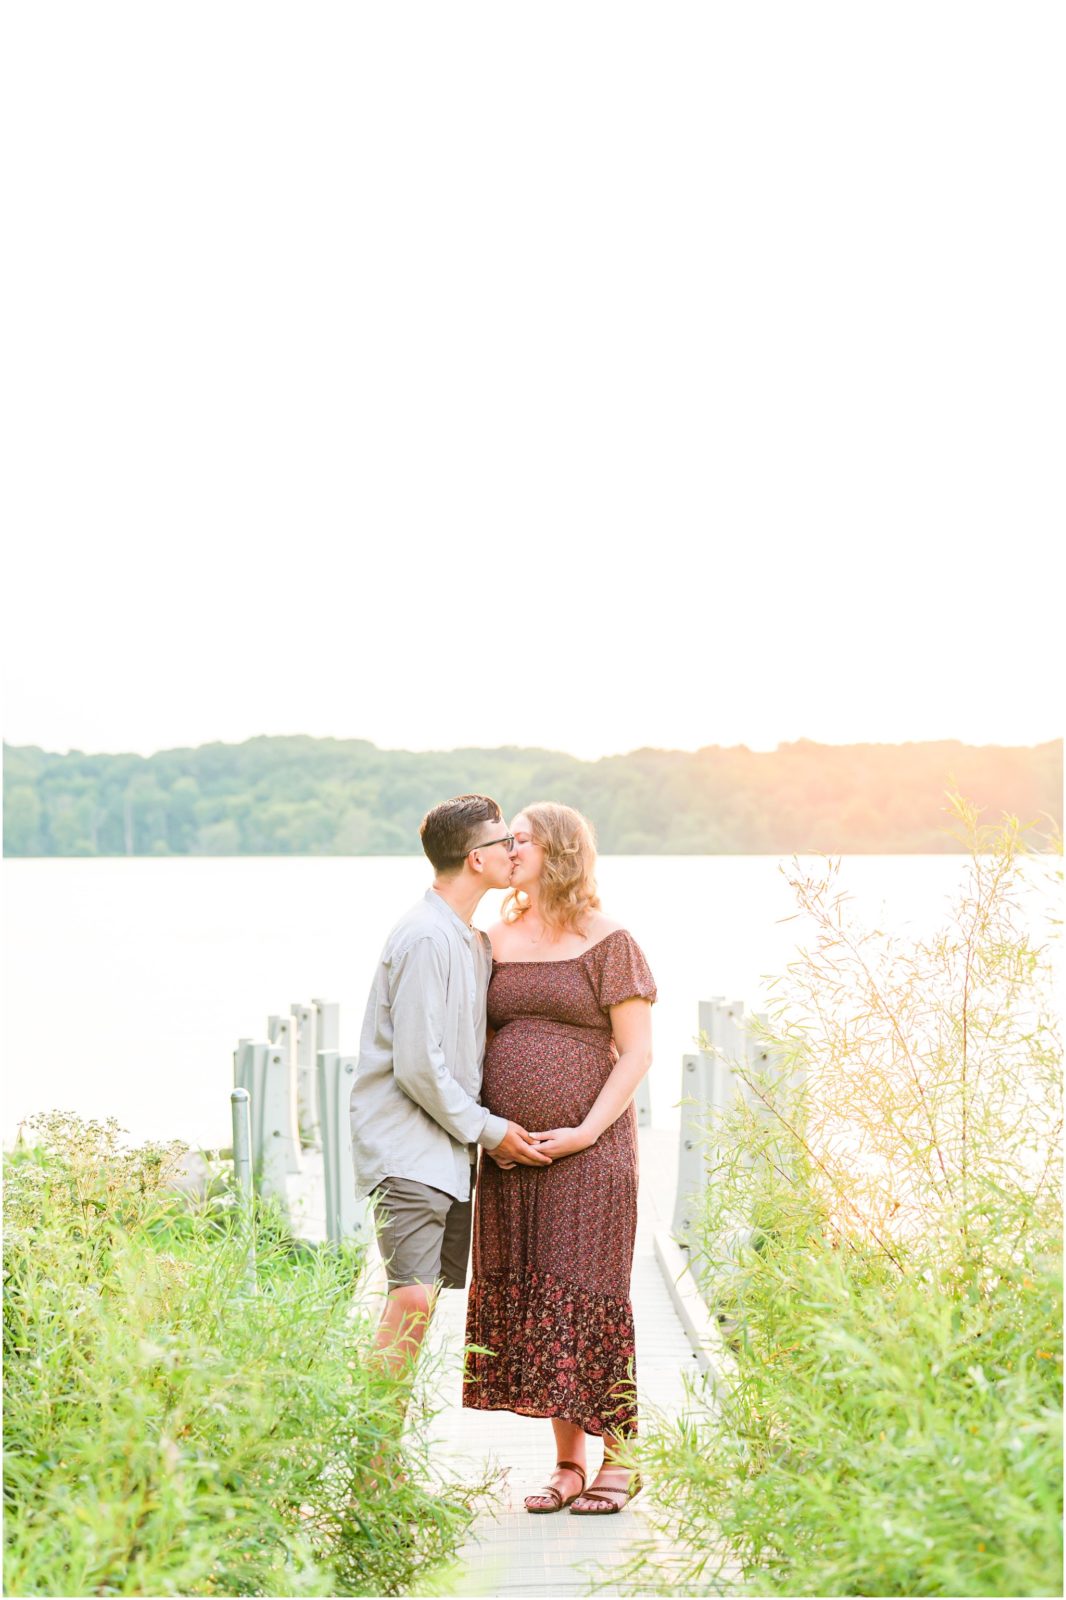 Kiss and cradle baby bump Eagle Creek Park maternity session